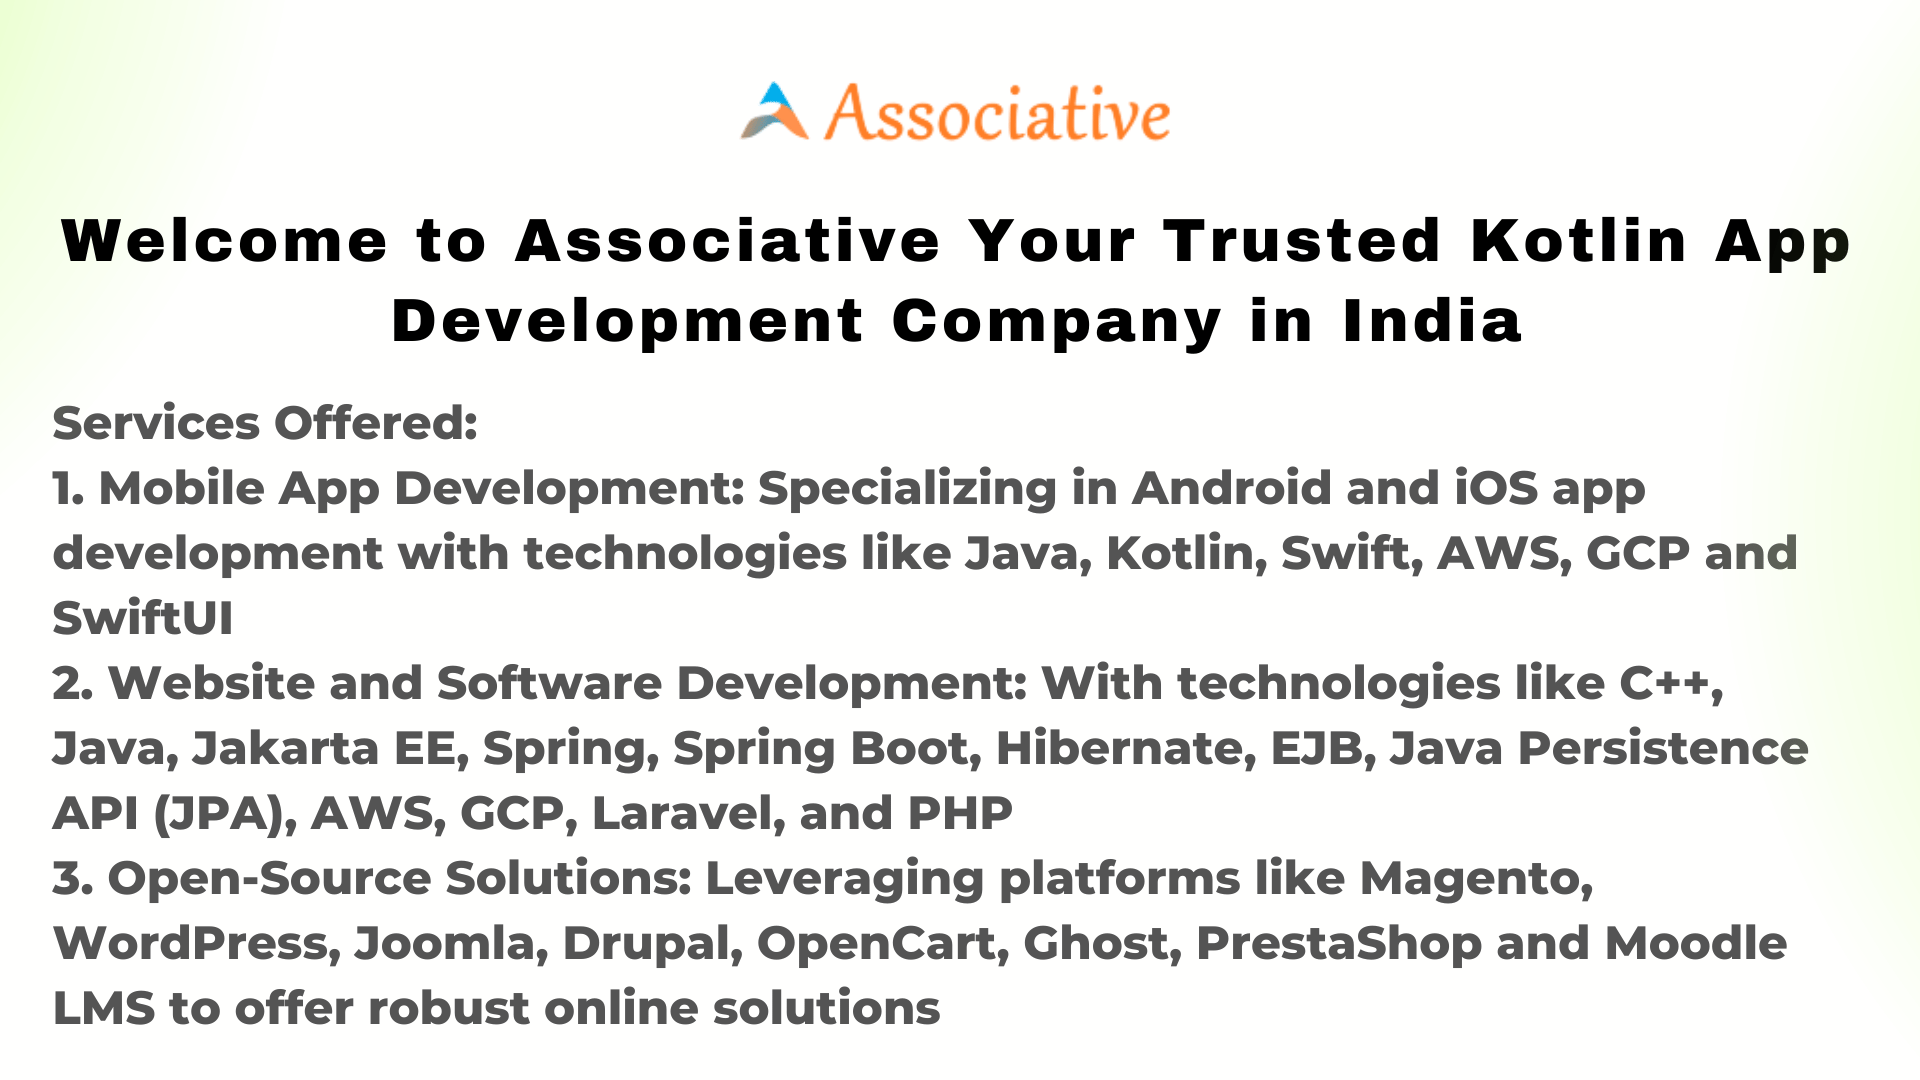 Welcome to Associative Your Trusted Kotlin App Development Company in India